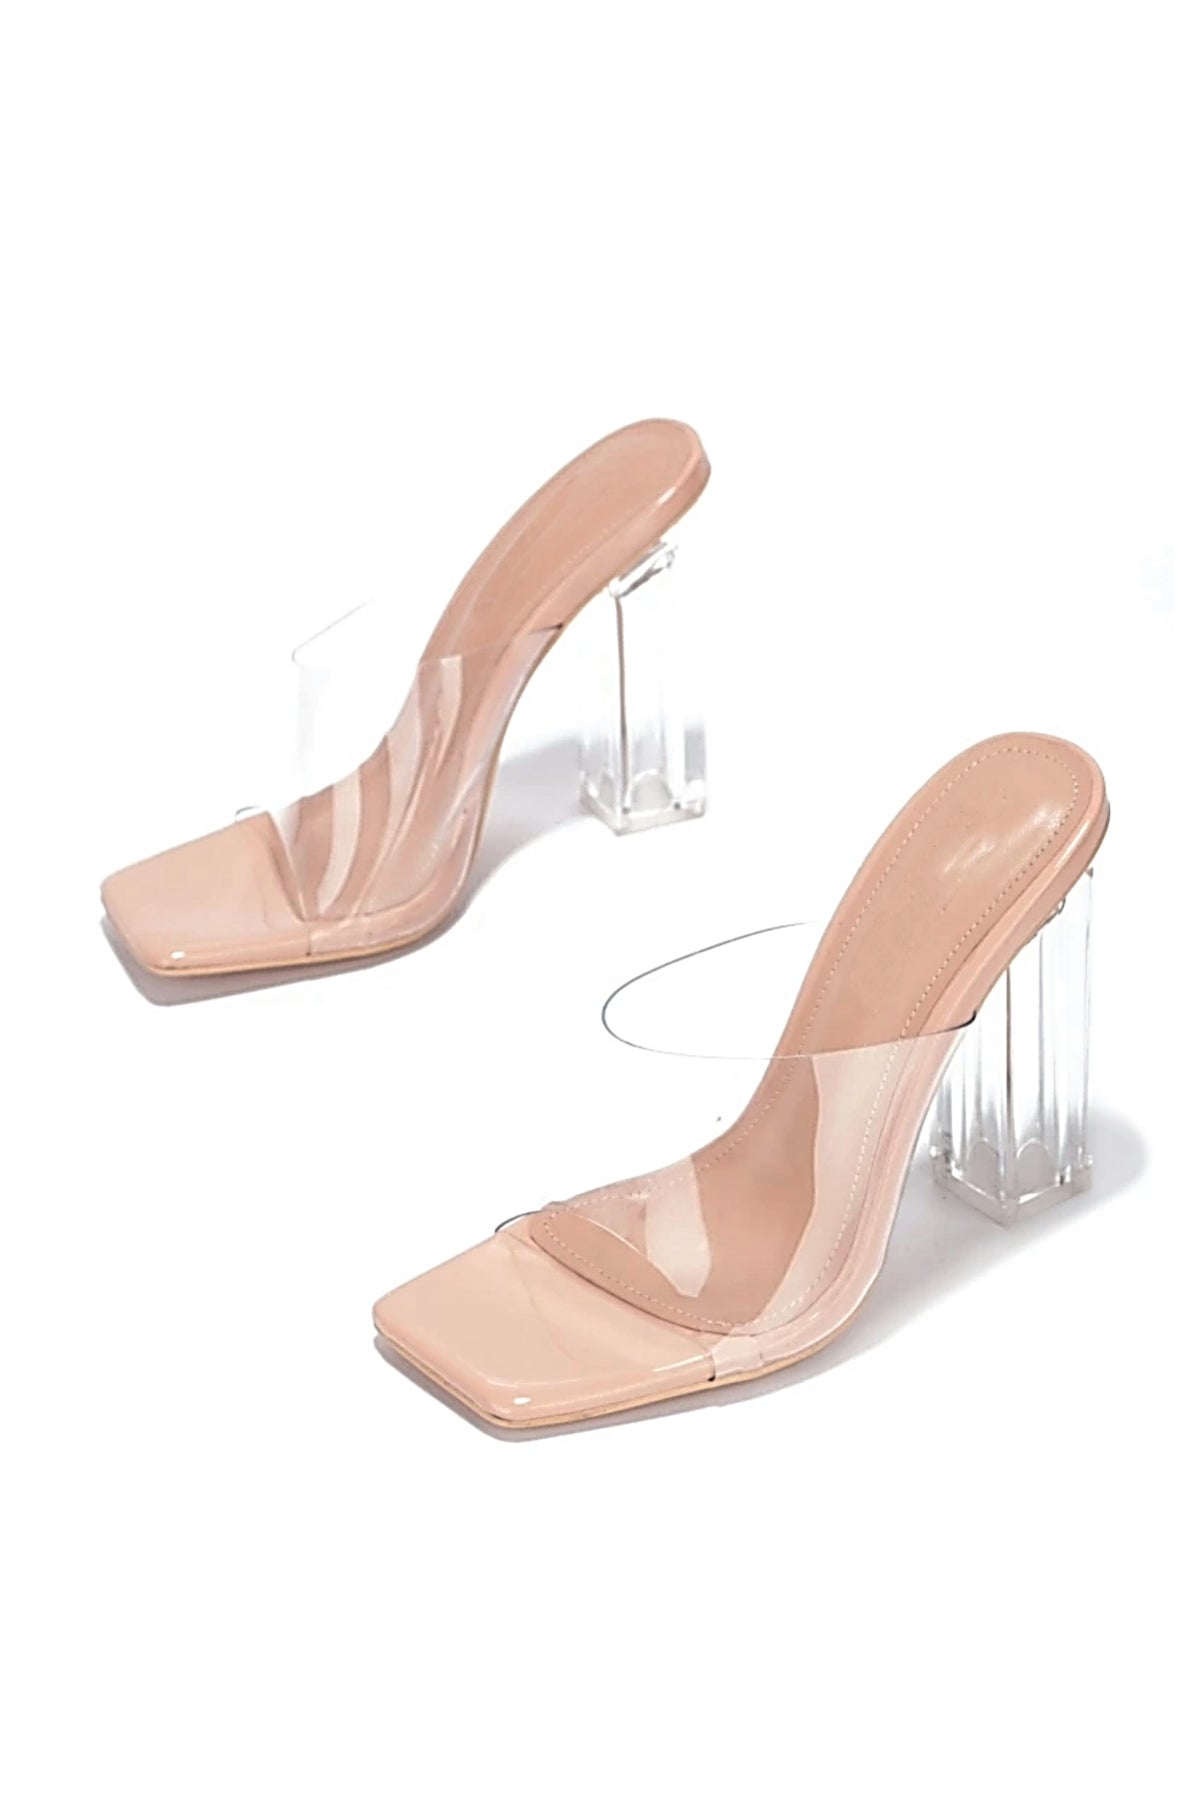 Amazon.com | XYD Clear Block Heel Sandals for Women Open Toe Dressy Summer  Transparent Ankle Strappy Pumps Party Wedding Shoes Size 4 Gold | Shoes